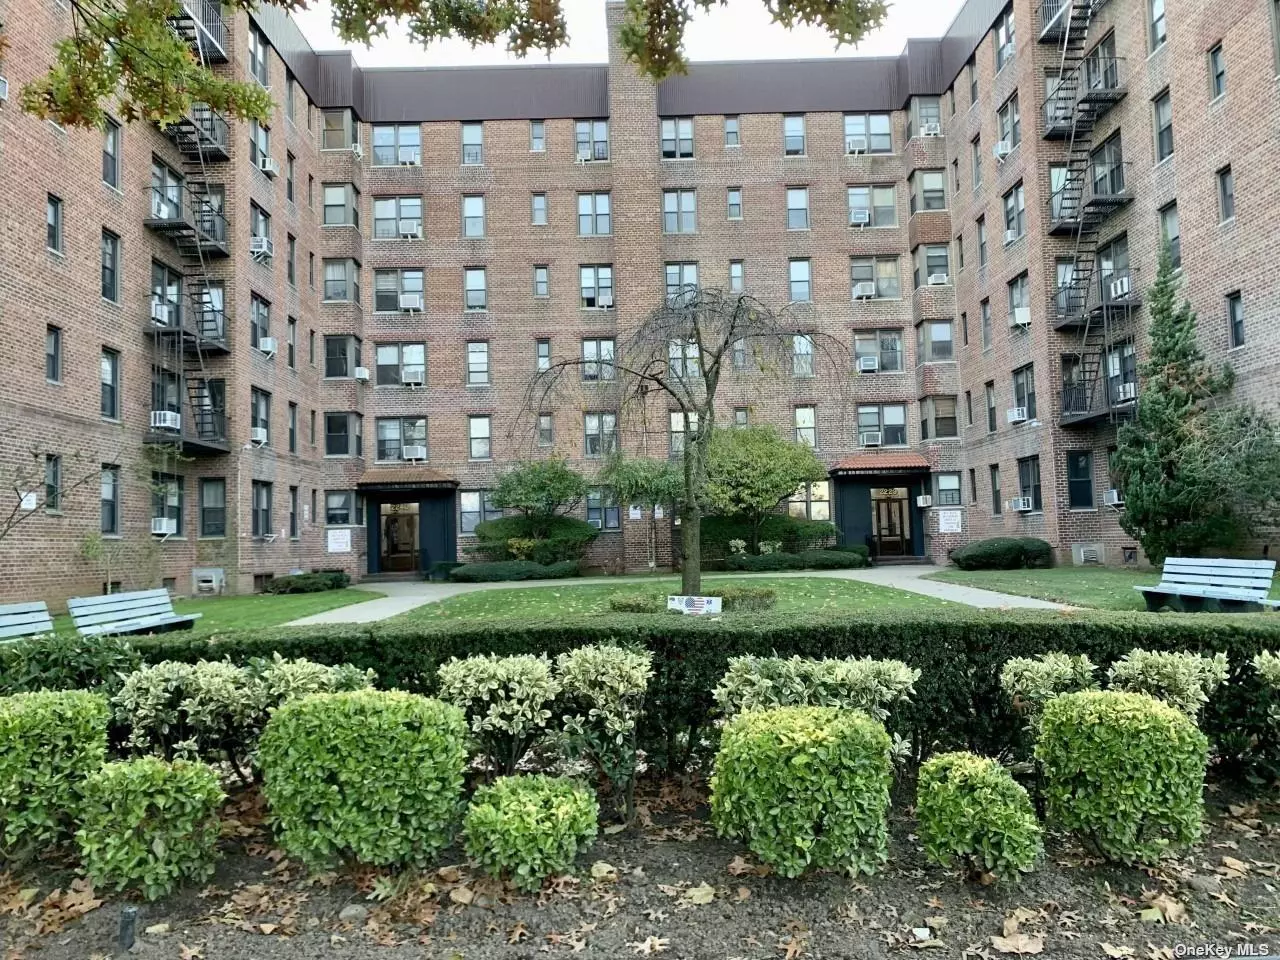 Incredible Opportunity To Live In This Turn Key Over-sized 1 Bedroom Unit Located in Marine Park, Brooklyn. This Unit Is Located On The Fourth Floor & Is Delighted With Tons Of Natural Lighting And An Incredible Scenic View From Above. Open The Front Door To Be Welcomed With Nicely Finished Hardwood Floors And The Perfect Living Space To Enjoy Yourself On Any Occasion. Large Bedroom and Full Bath, Along With A Butcher Block Kitchen That&rsquo;s Made To Last. Common Area Basement Has Storage Areas For Owners; As Well As Parking Areas By Permit Owners May Apply For. Don&rsquo;t Wait On This Unit! Book Your Appointment Today And You Will Not Be Disappointed!